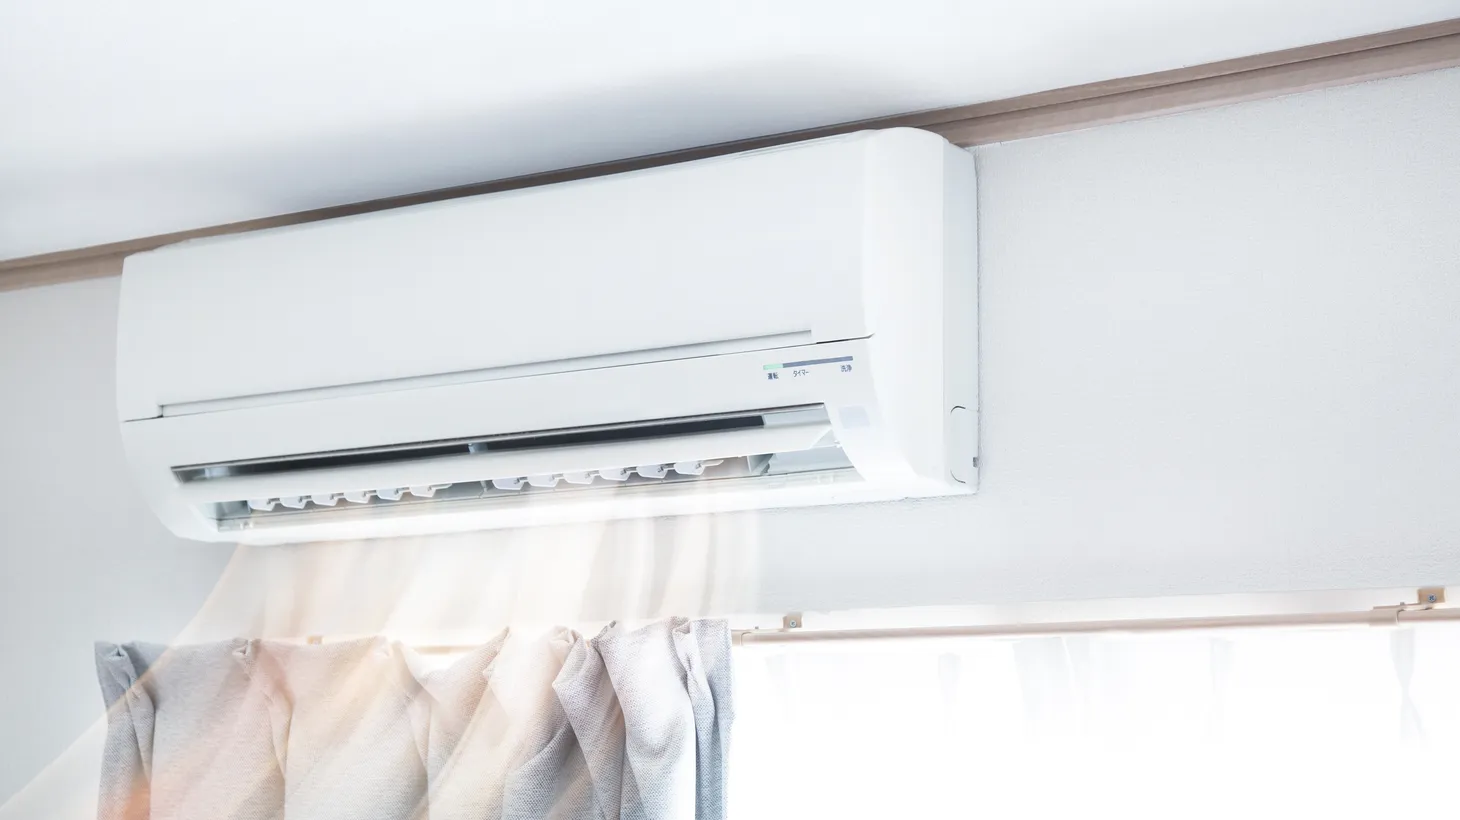 Many tenants in Los Angeles don’t have access to air conditioning in their apartments, leaving them vulnerable to heat-related illnesses.